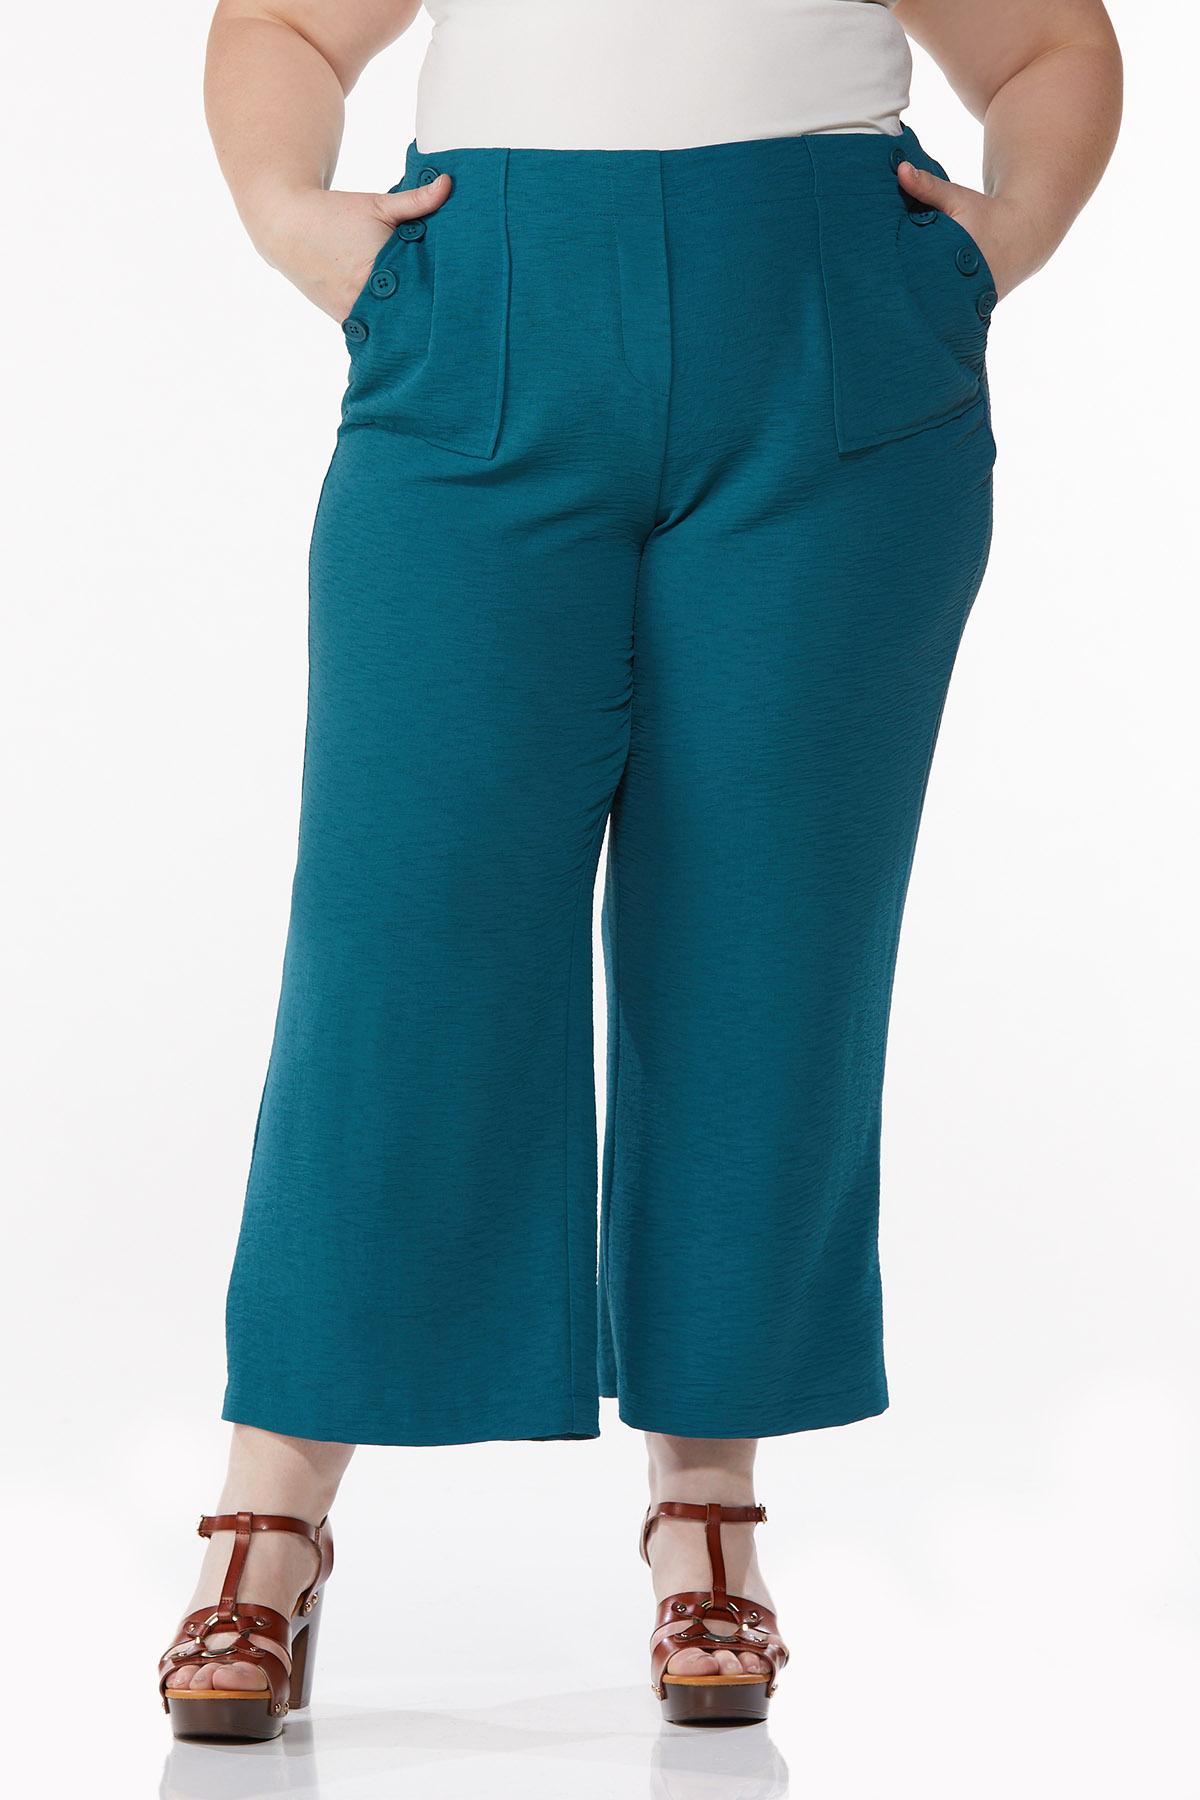 Plus Size Teal Cropped Pants